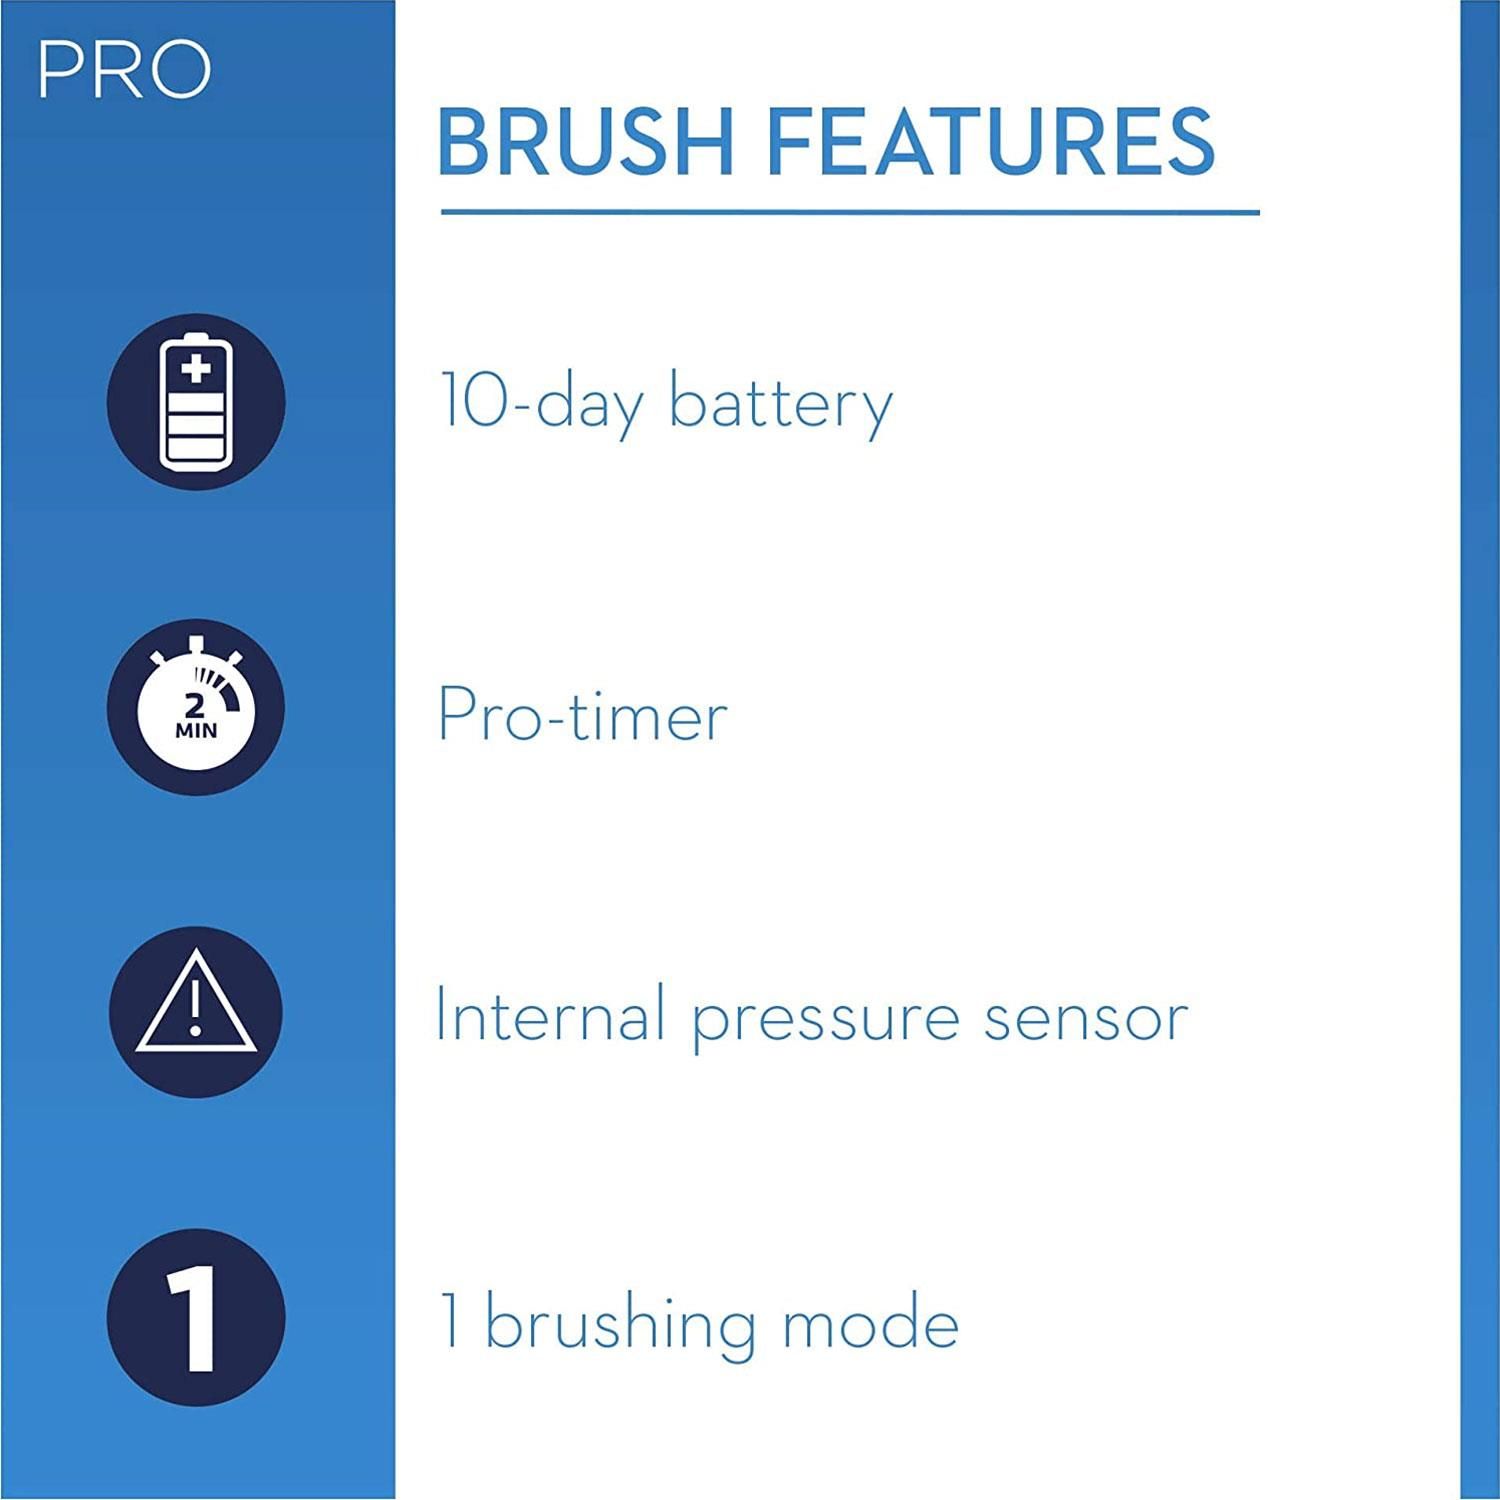 Oral-B Pro 600 Cross Action Electric Toothbrush Rechargeable.  Rechargeable brush with one mode and one brush head - 3D cleaning, ships with 2 pin plug. The Oral-B Pro 600 cross action electric rechargeable toothbrush provides a clinically proven clean versus a regular manual toothbrush. The professionally inspired design of the cross action toothbrush head surrounds each tooth with bristles angled at 16 degrees and 3D cleaning action oscillates, rotates and pulsates to break up and remove up to 100 Percent more plaque than a regular manual toothbrush. An in-handle timer helps you brush for a dentist-recommended 2 minutes. Best of all it is brought to you by Oral-B – the #1 brand used by dentists worldwide. Oral-B Pro 600 electric rechargeable toothbrush is compatible with the following replacement toothbrush heads: Cross Action, 3D White, Sensi Ultrathin, Sensitive Clean, Precision Clean, Floss Action, Tri Zone, Dual Clean, Power Tip, Ortho Care.

Features:

Up to 100% more plaque removal: Round head cleans better for healthier gums
Movement helps you achieve enhanced cleaning results
Dentist-inspired round brush head oscillates, rotates and pulsates to break up and remove plaque
One brushing mode: Daily clean
Content: One electric toothbrush handle with charger two-pin UK plug, one toothbrush head; Oral-B, the #1 brand used by dentists worldwide

The Box Contain: 1x electric toothbrush handle with charger two-pin UK plug, 1x toothbrush head